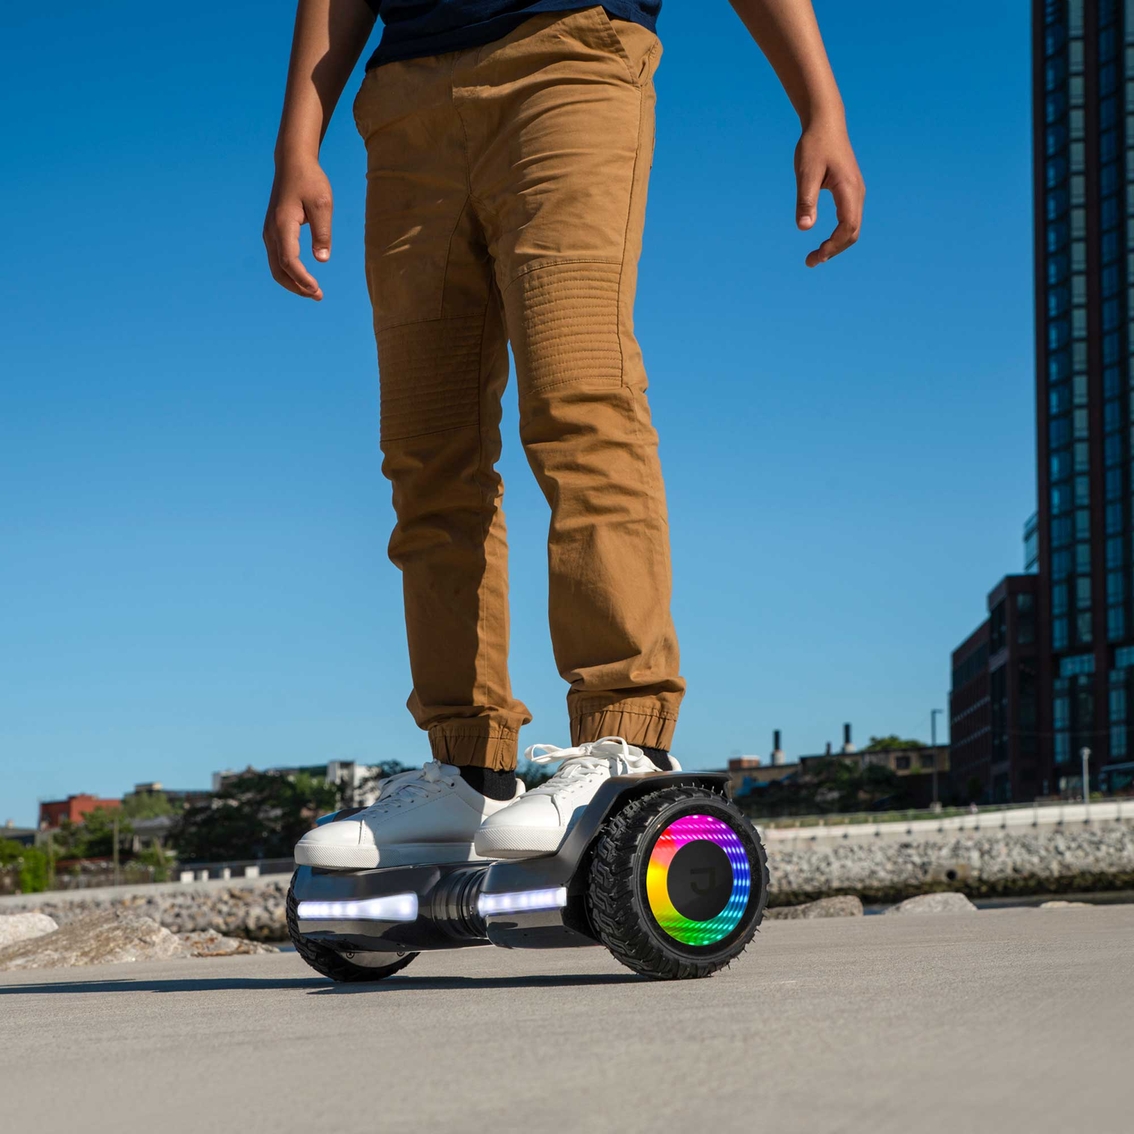 Jetson Flash Self Balancing Hoverboard with Built In Bluetooth Speaker - Image 9 of 10